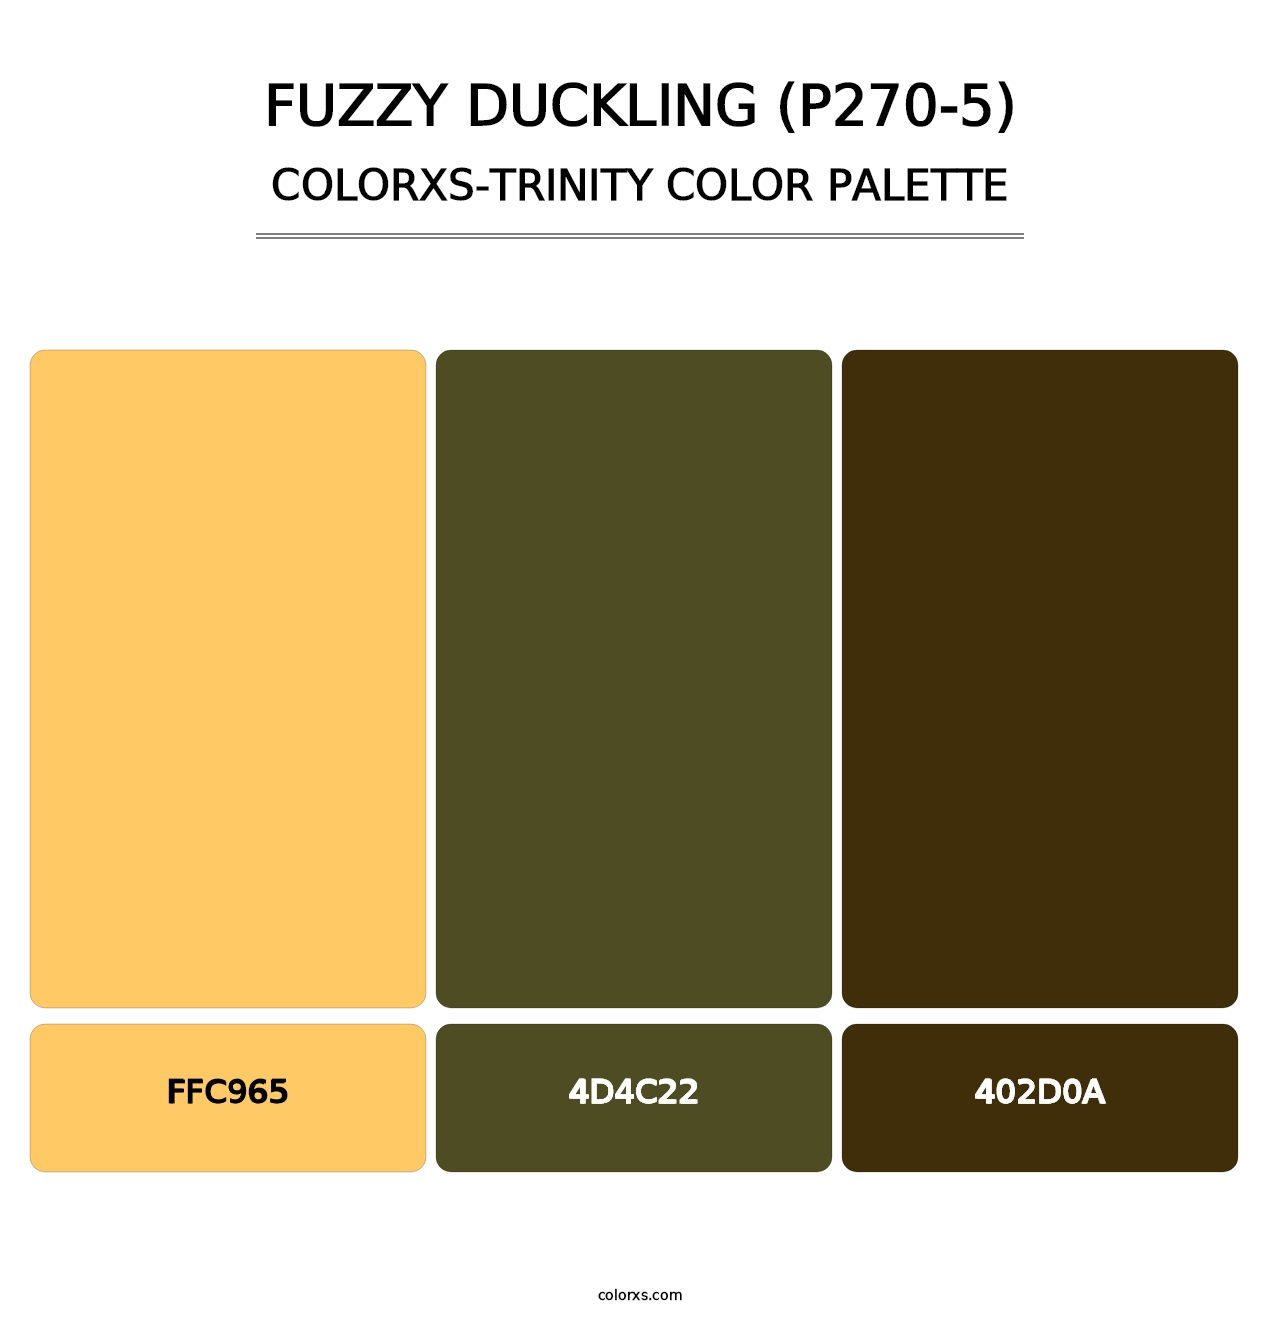 Fuzzy Duckling (P270-5) - Colorxs Trinity Palette